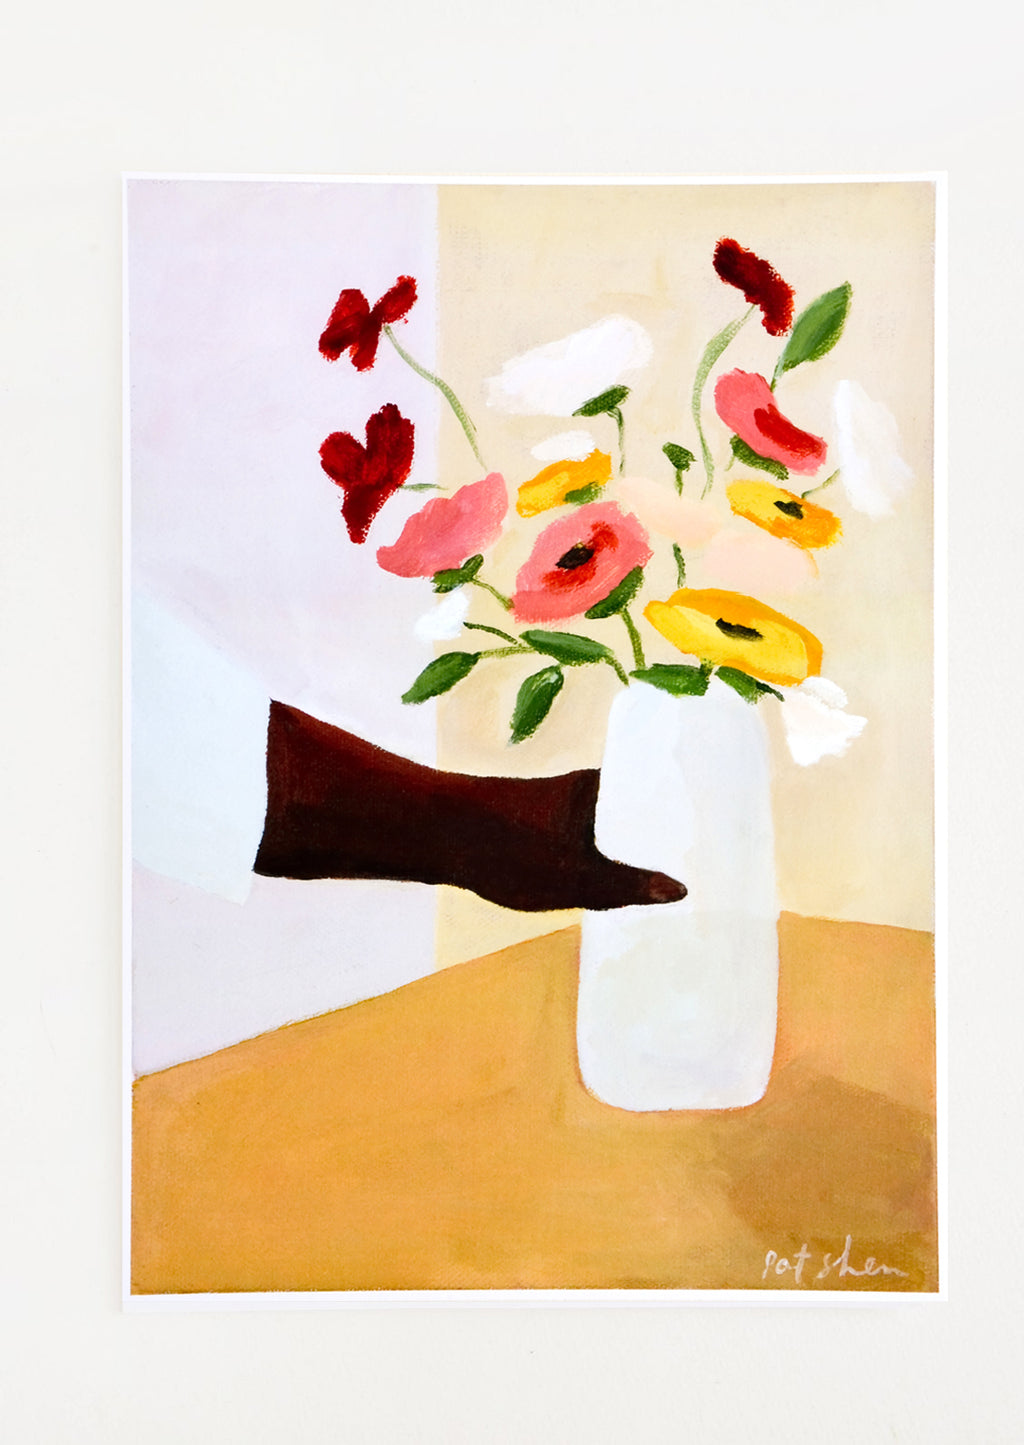 1: Art print featuring a Black person's hand placing a vase of flowers on a table